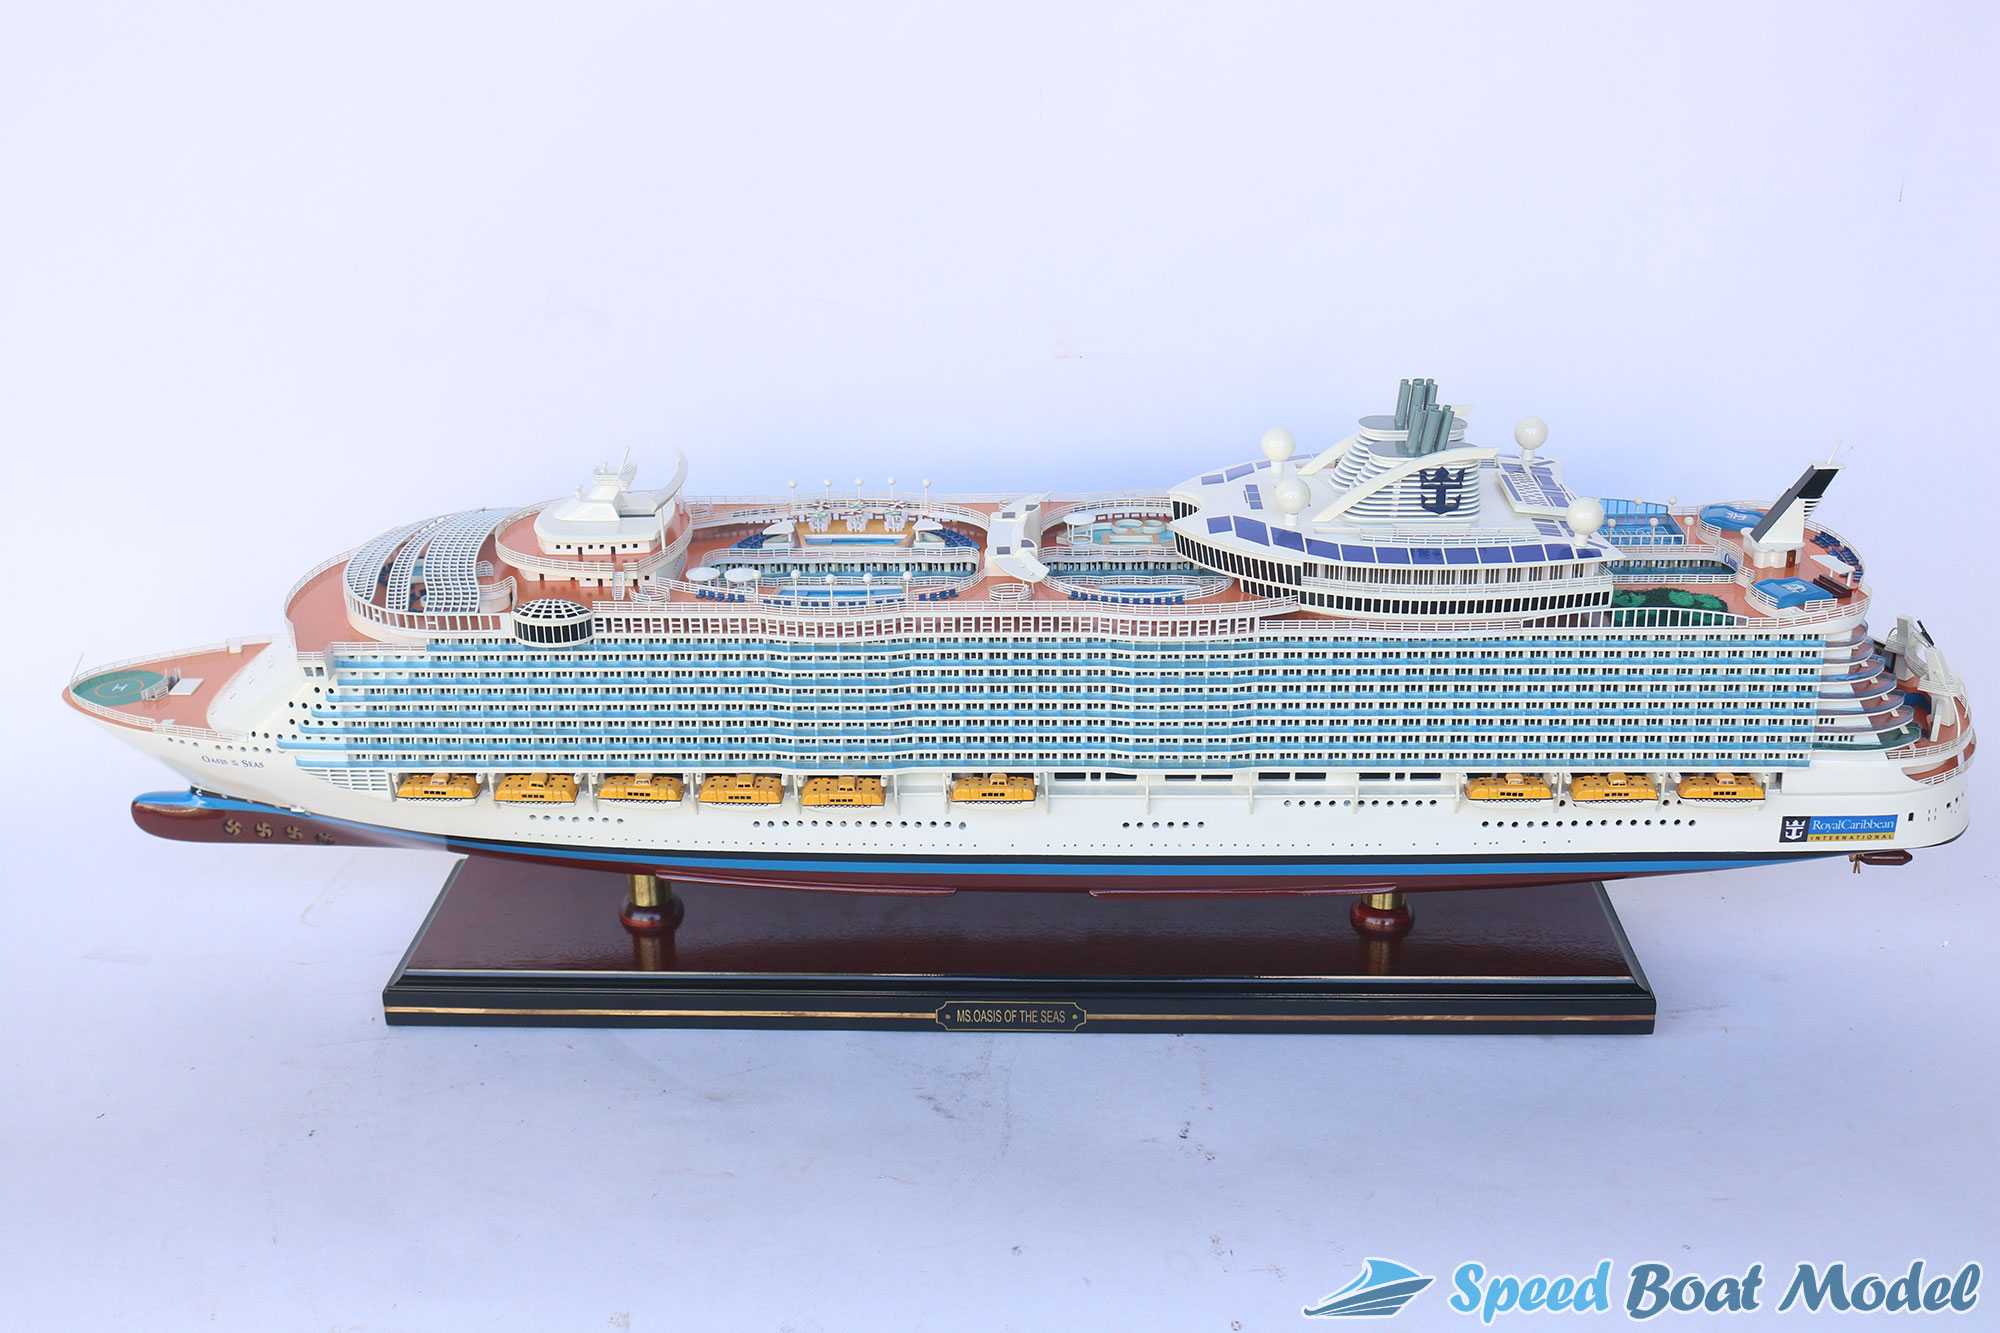 Ms Oasis Of The Seas Cruise Ship Model 35.4"